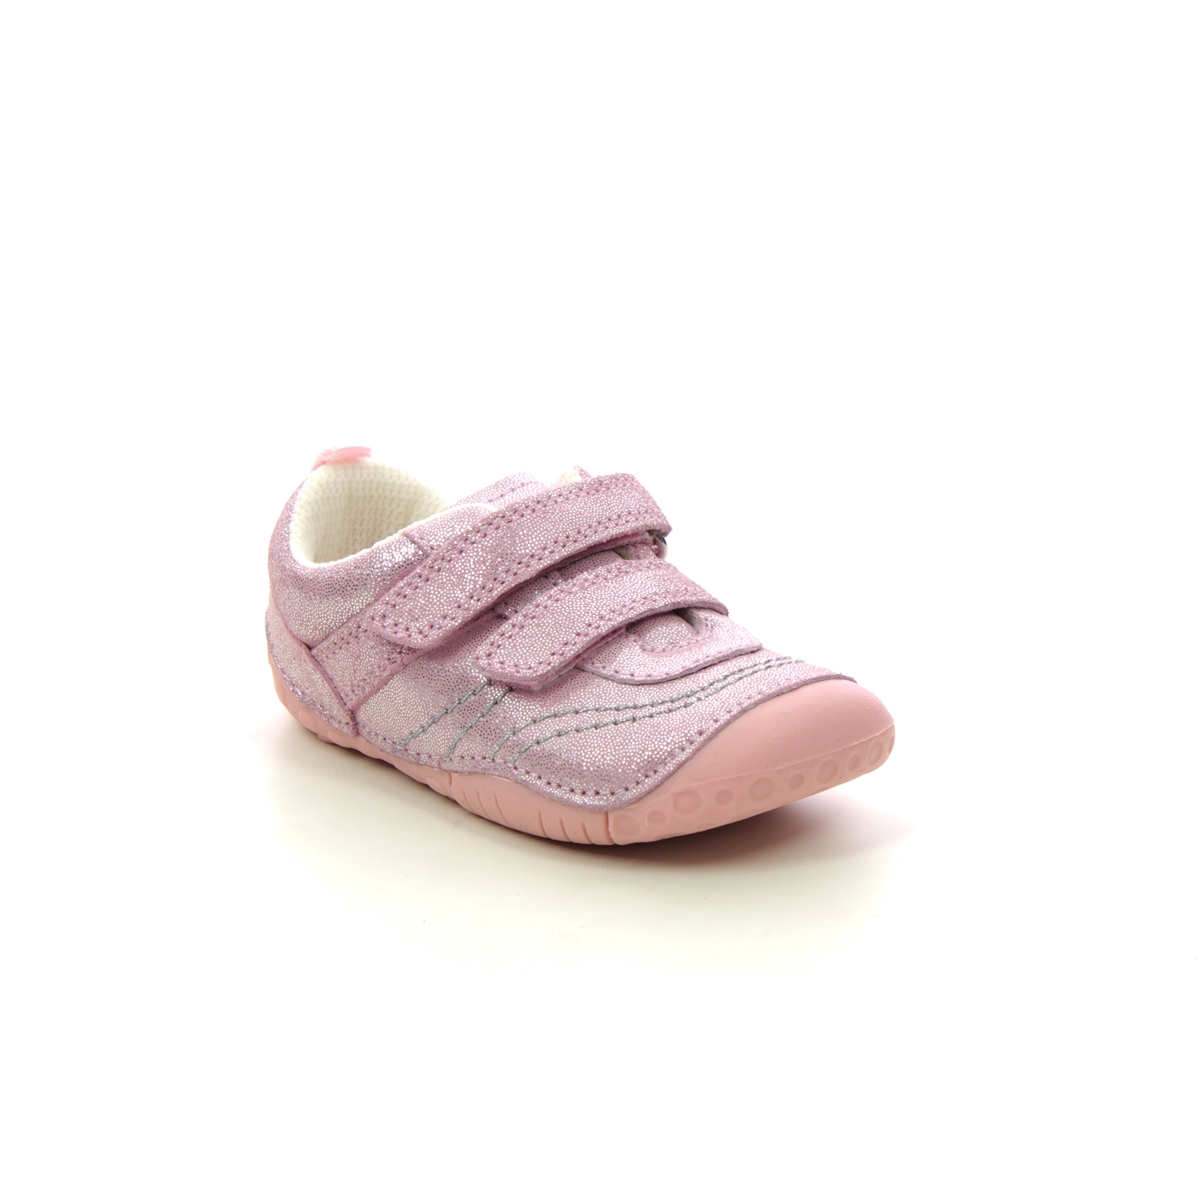 Start Rite - Little Smile 2V In Pink Glitter 0823-66F In Size 4.5 In Plain Pink Glitter First And Baby Shoes  In Pink Glitter For kids